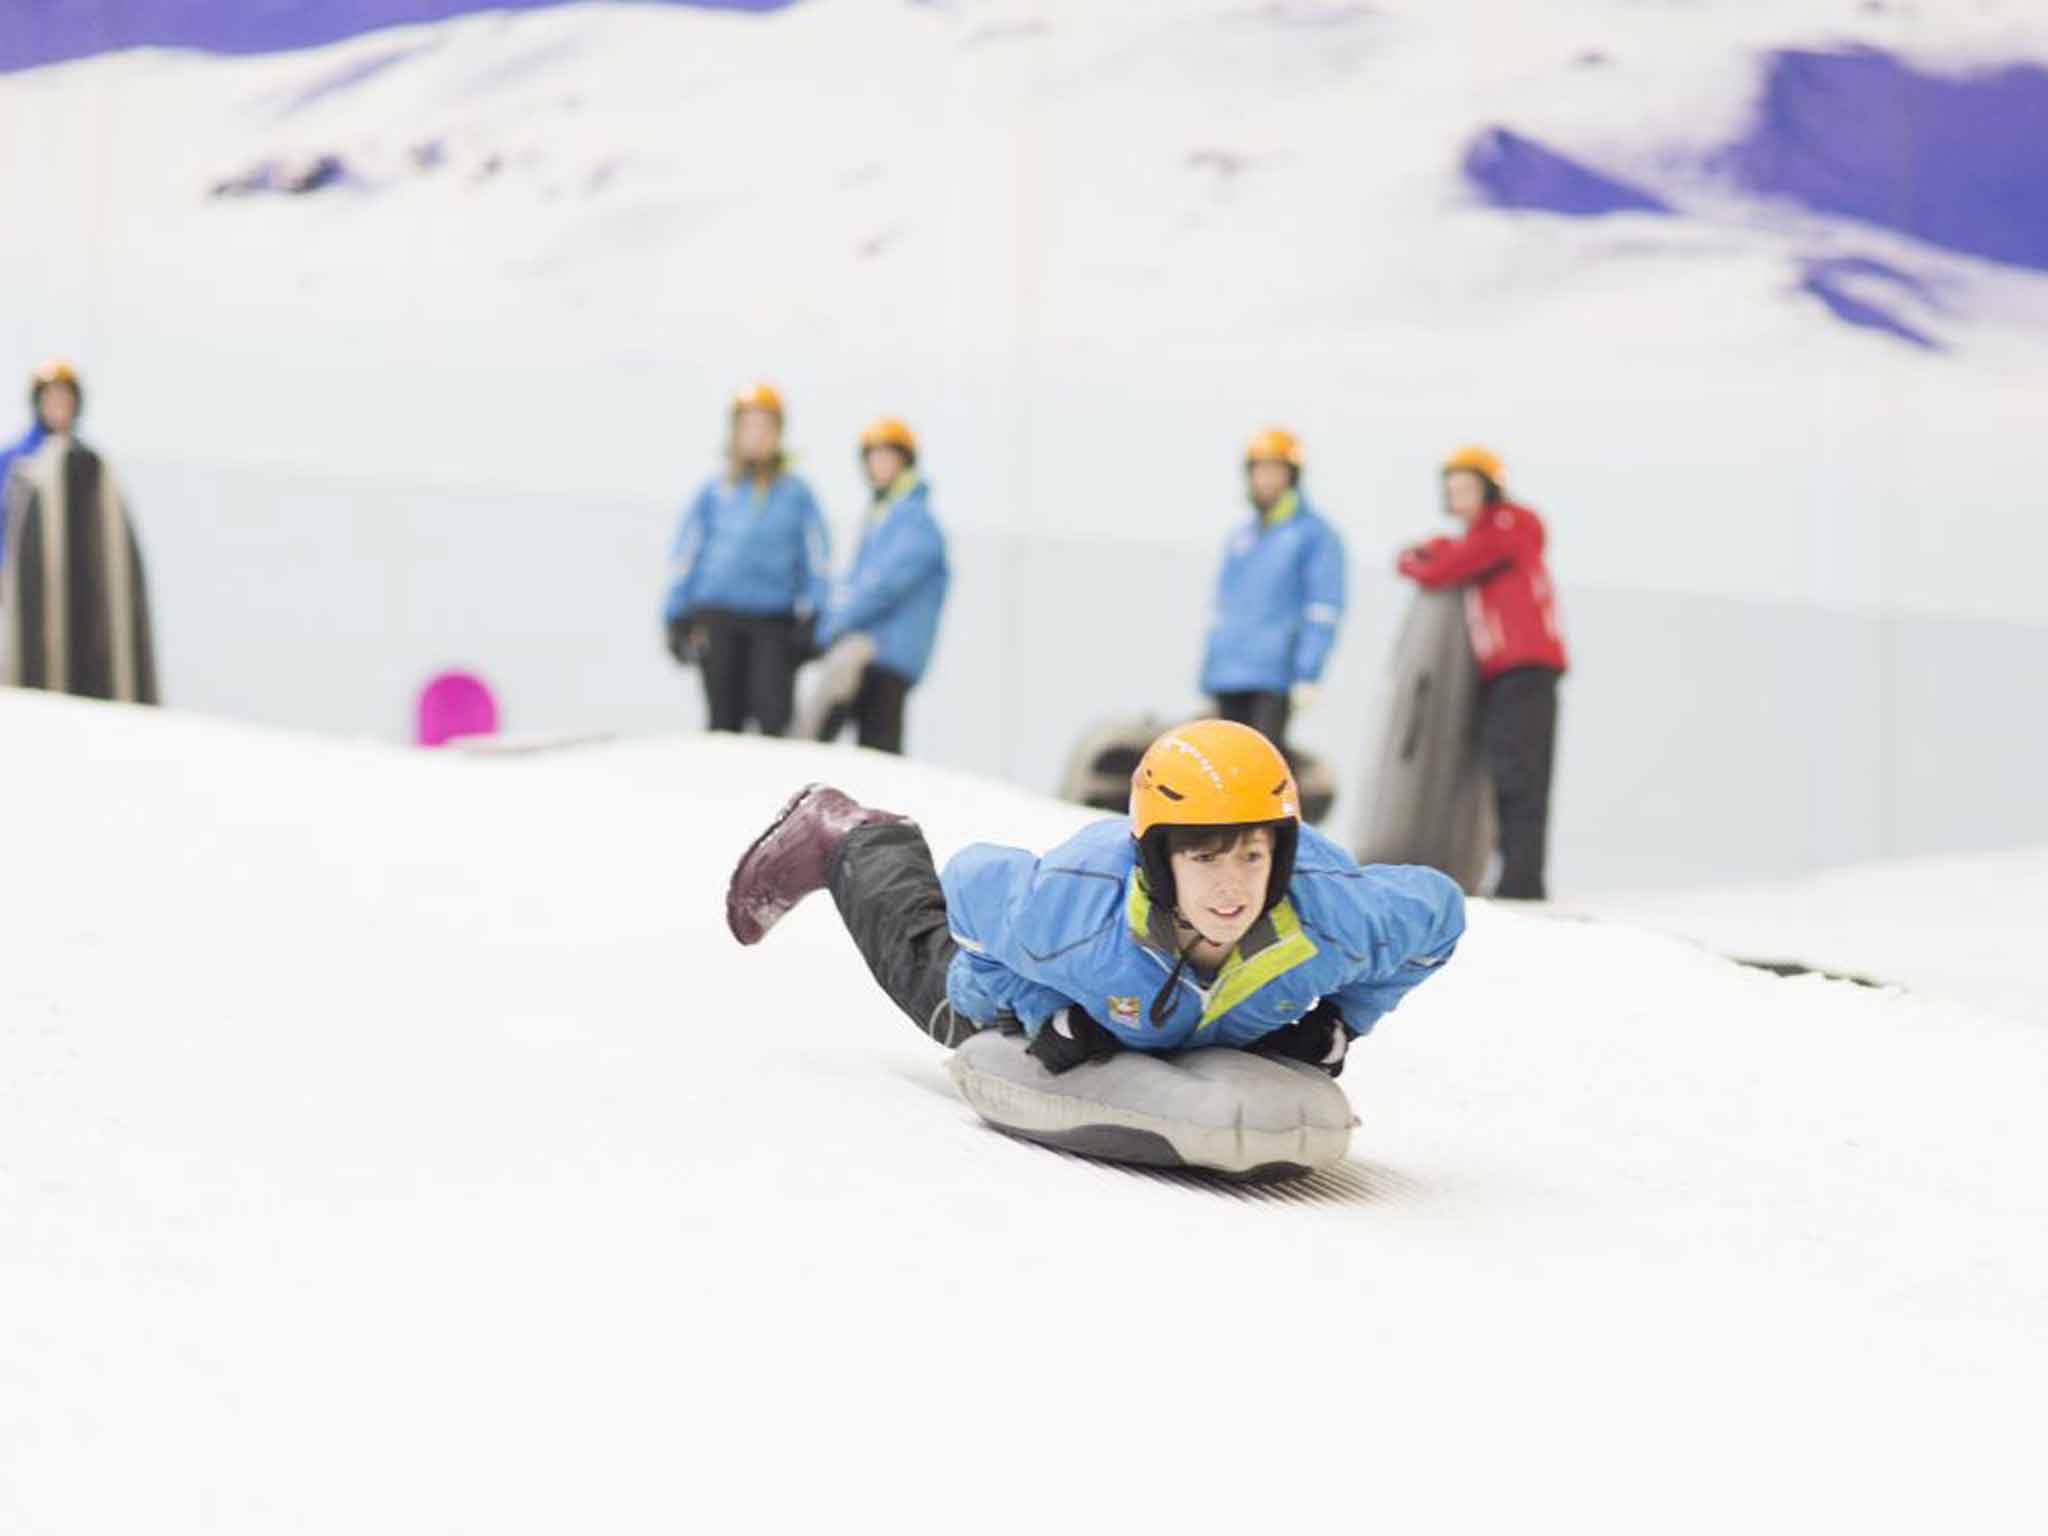 &#13;
Airboarding at Chill Factore&#13;